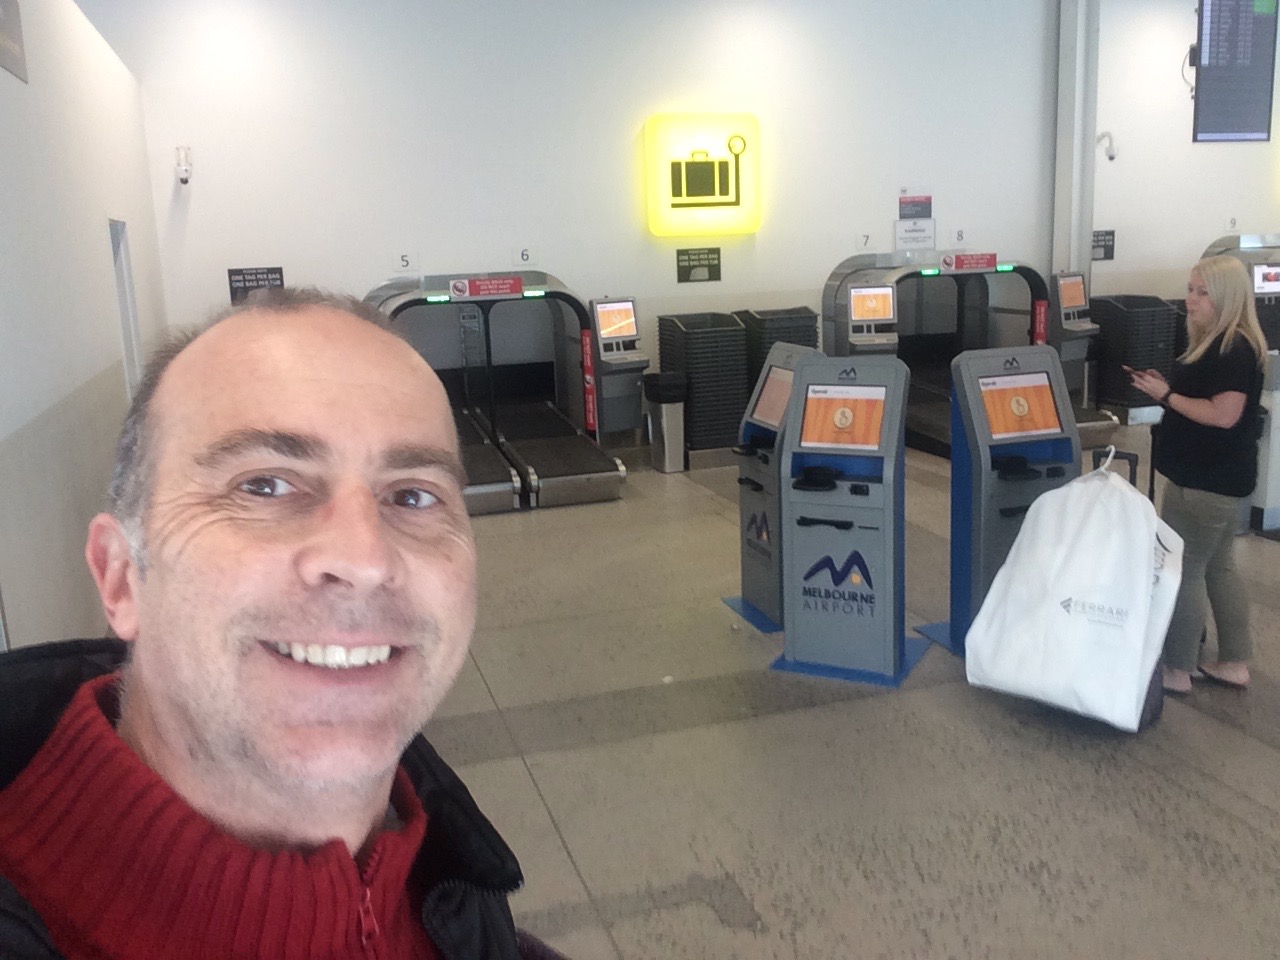 a man taking a selfie in front of a check-in counter